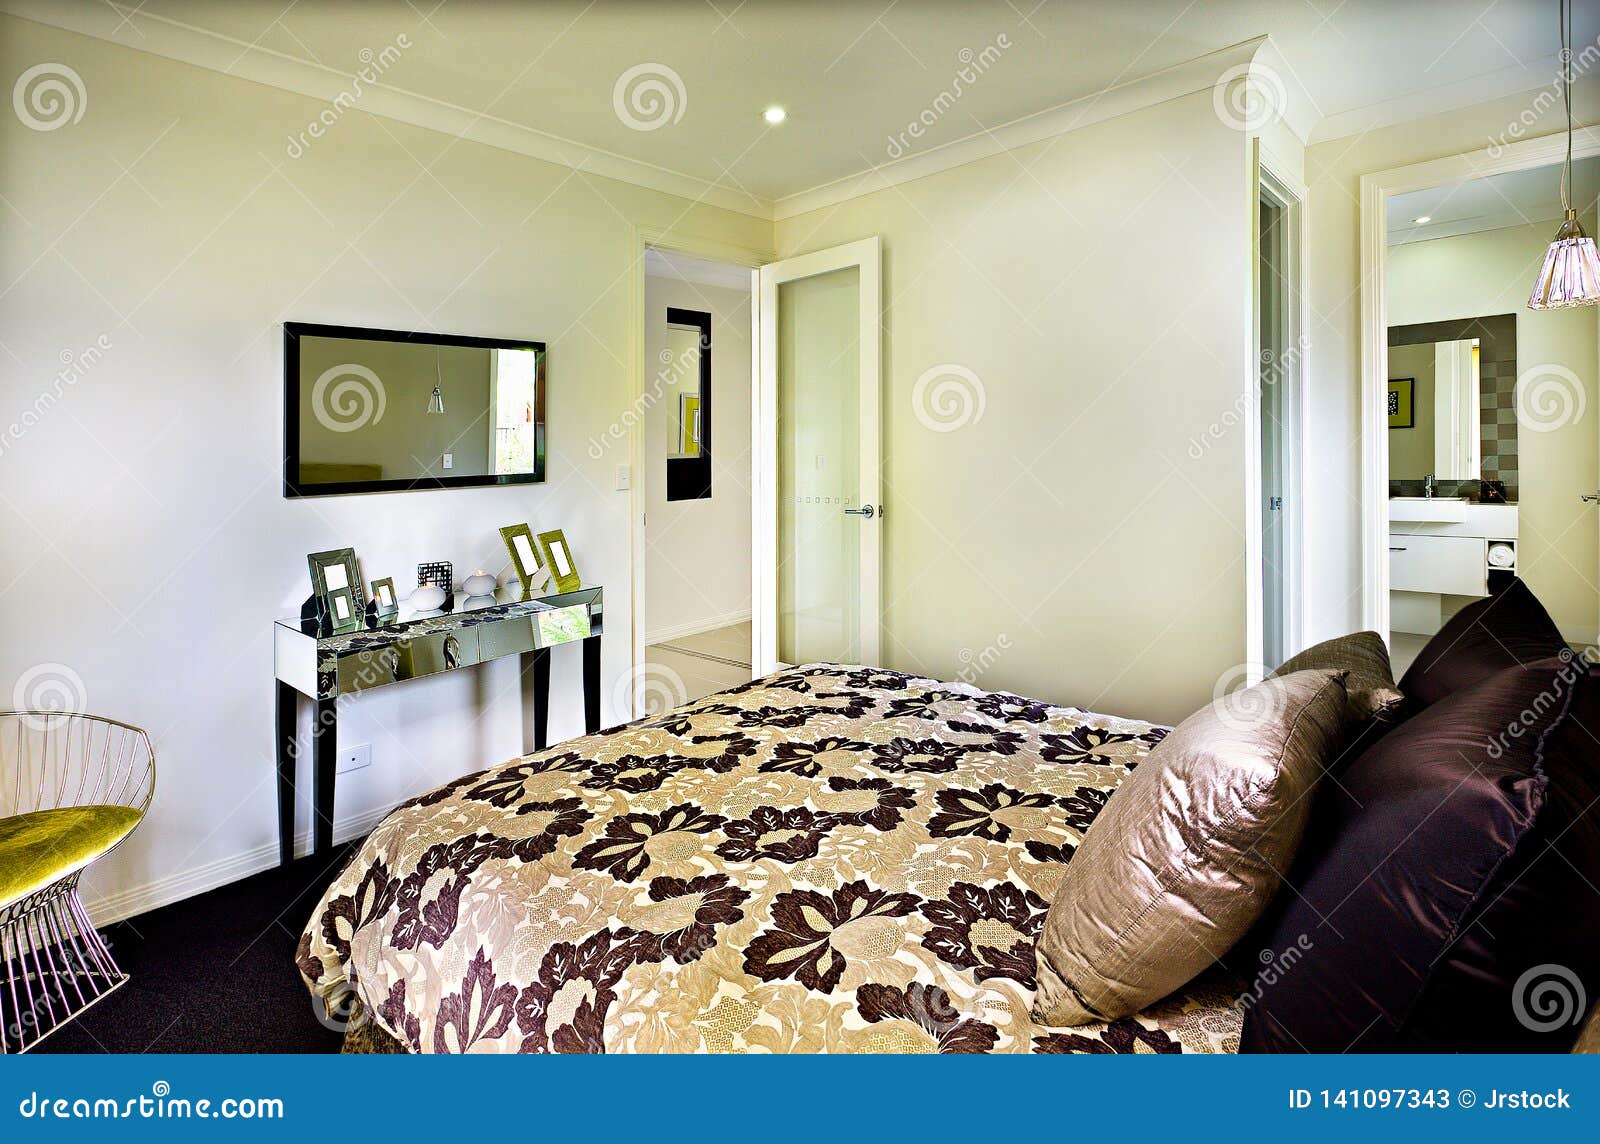 Open Bedroom In The Modern House With Shiny Pillows Stock